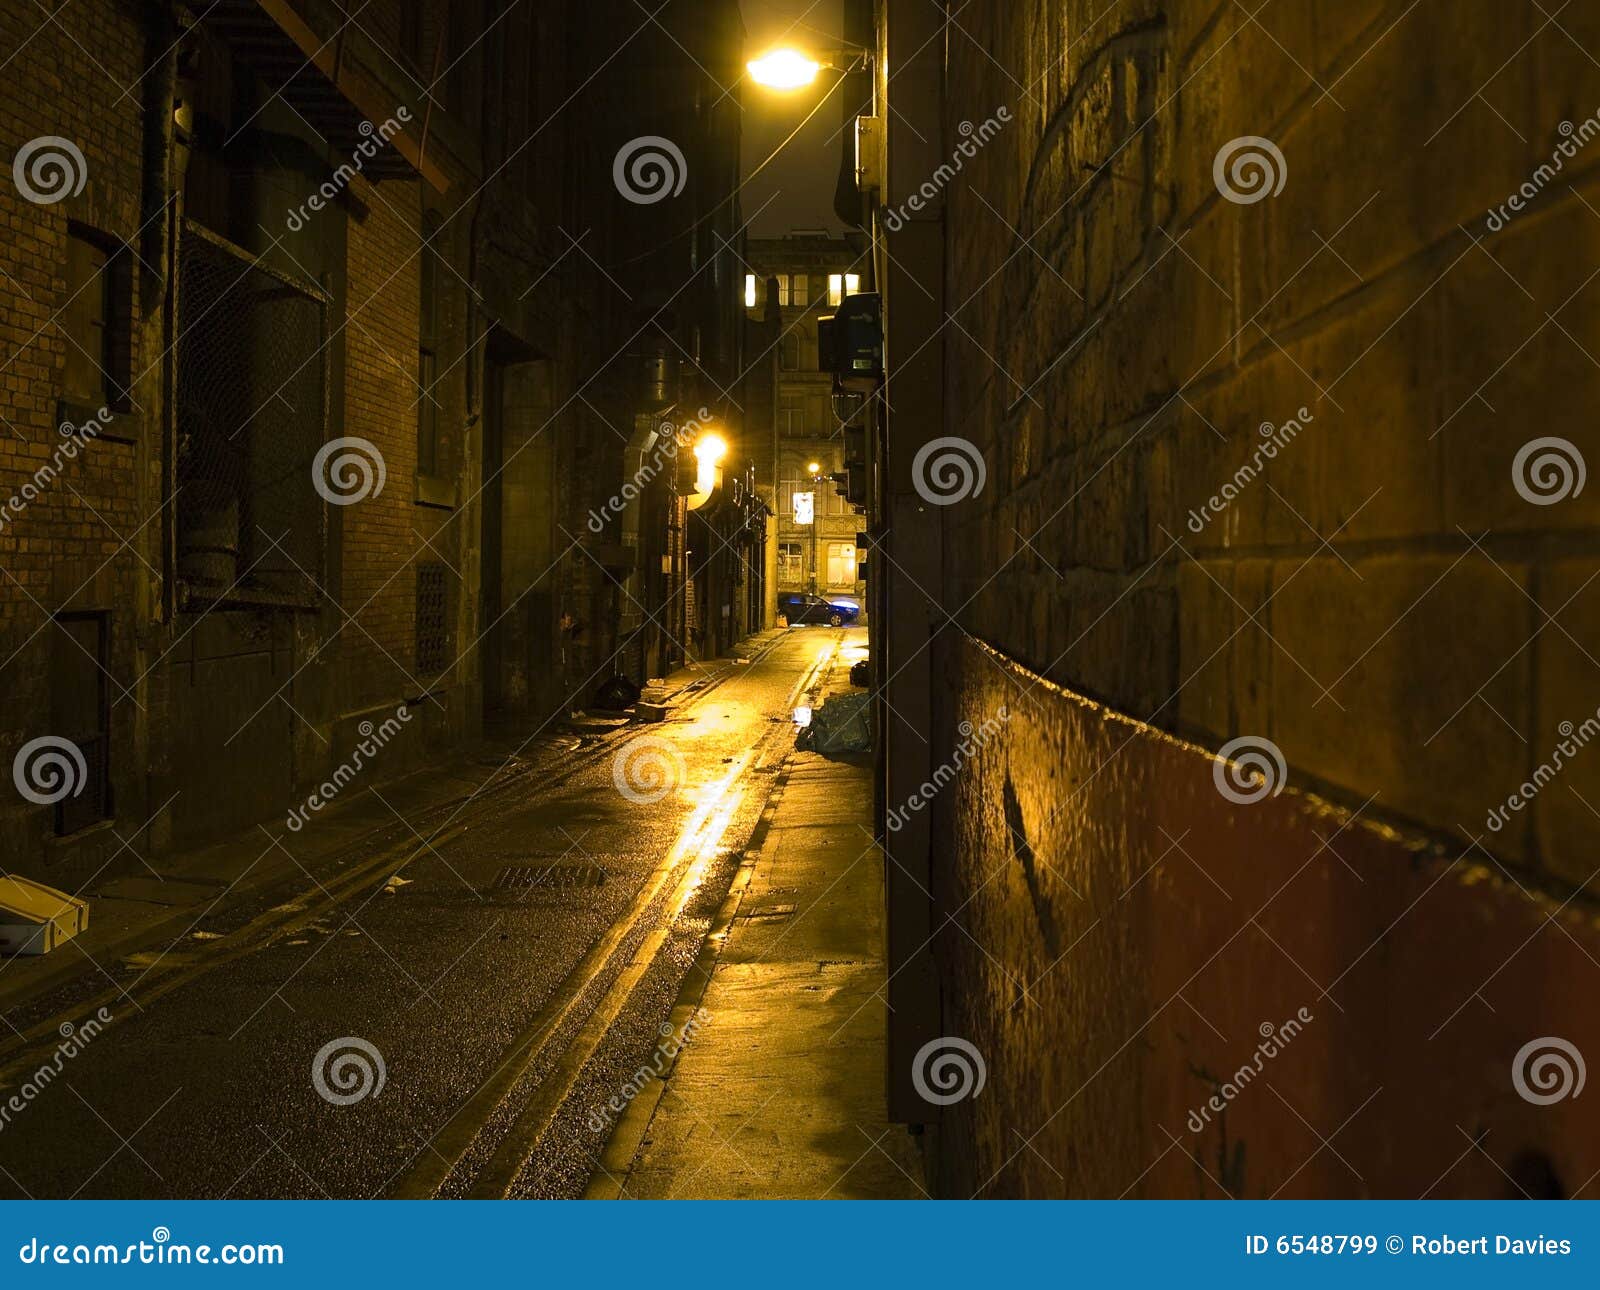 Scary Dark Alleyway At Night Stock Image Image Of Light Crime